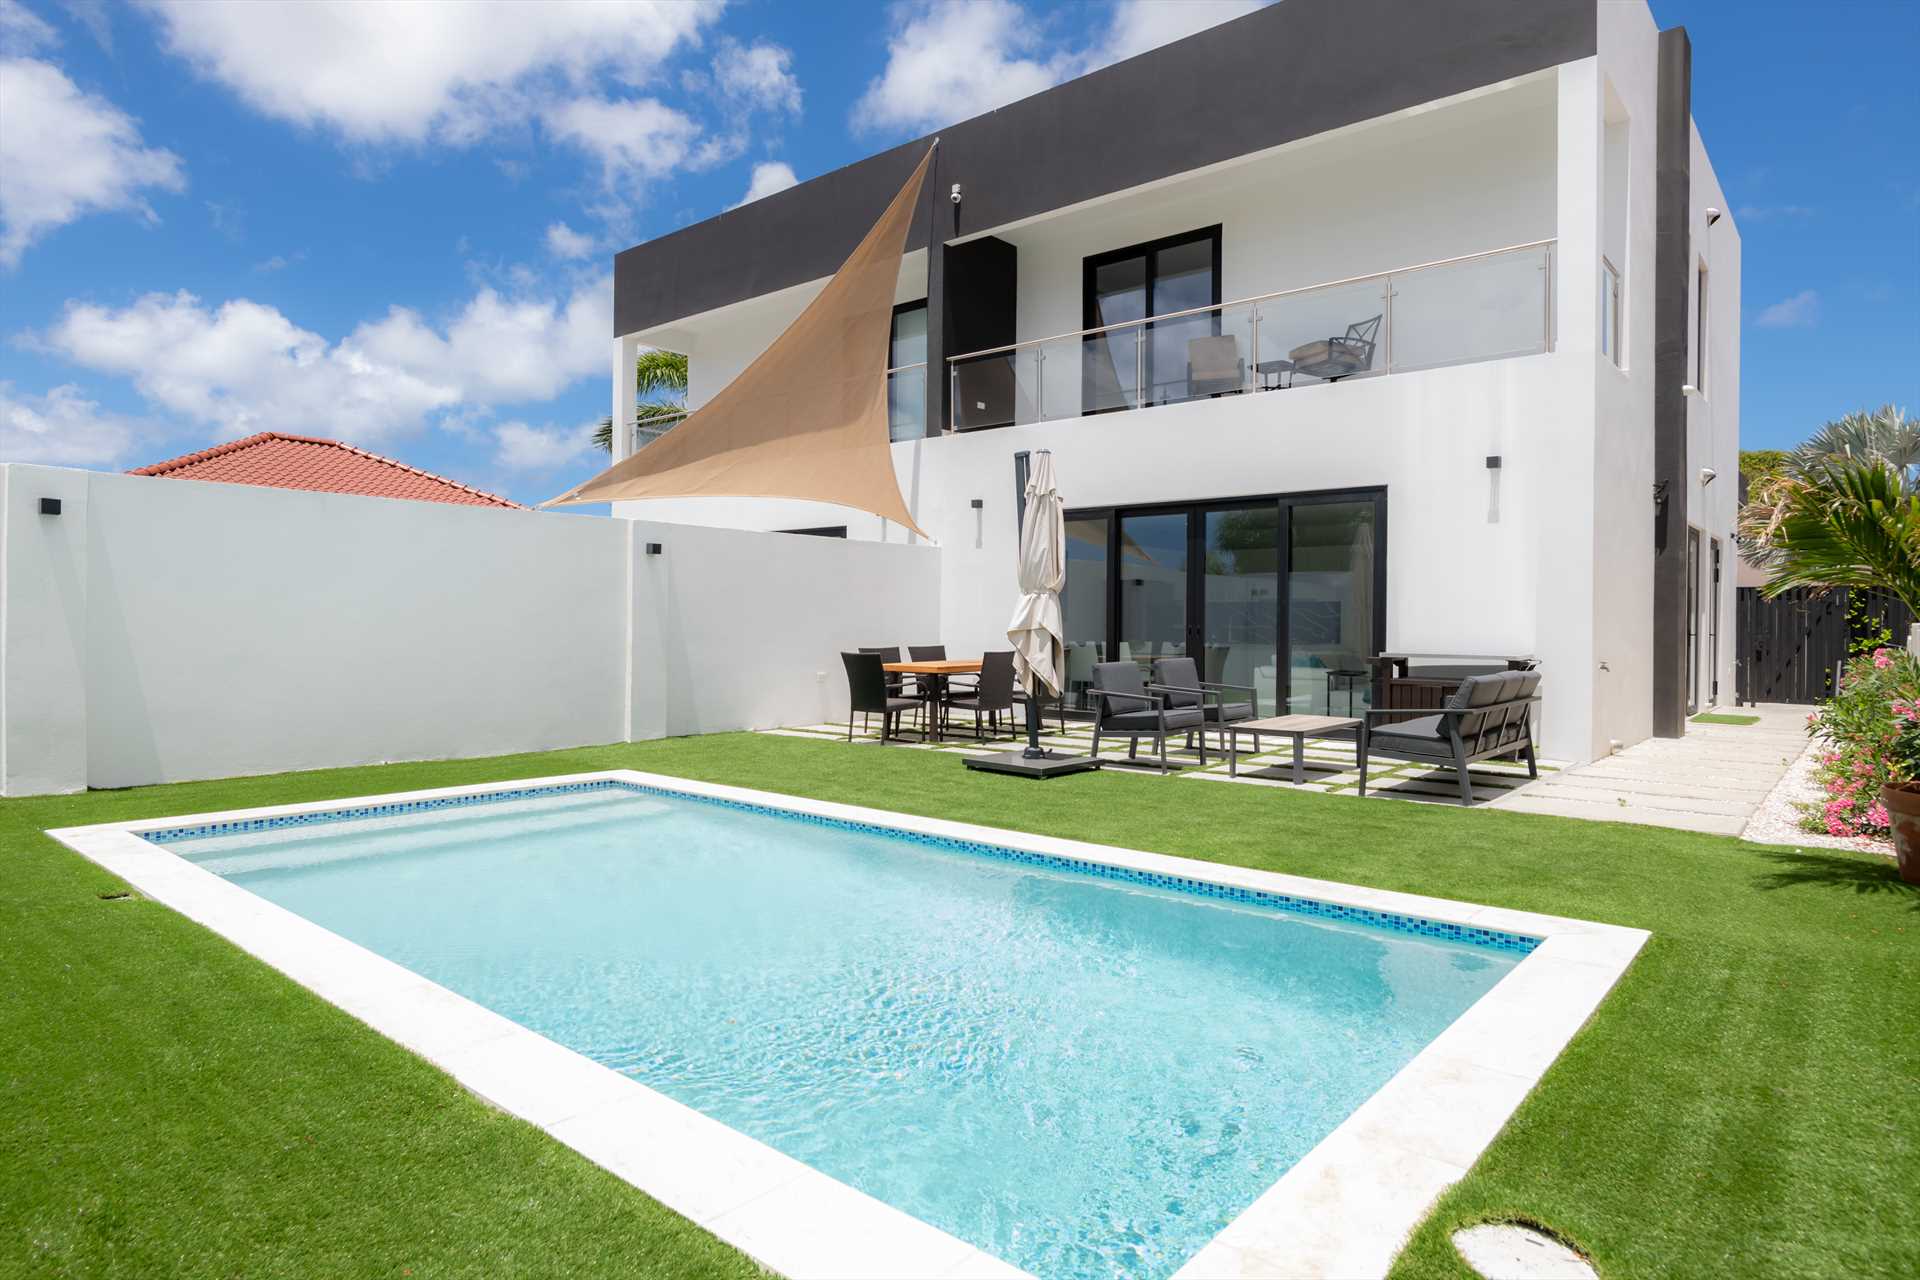 A modern haven with a pool for your exclusive enjoyment